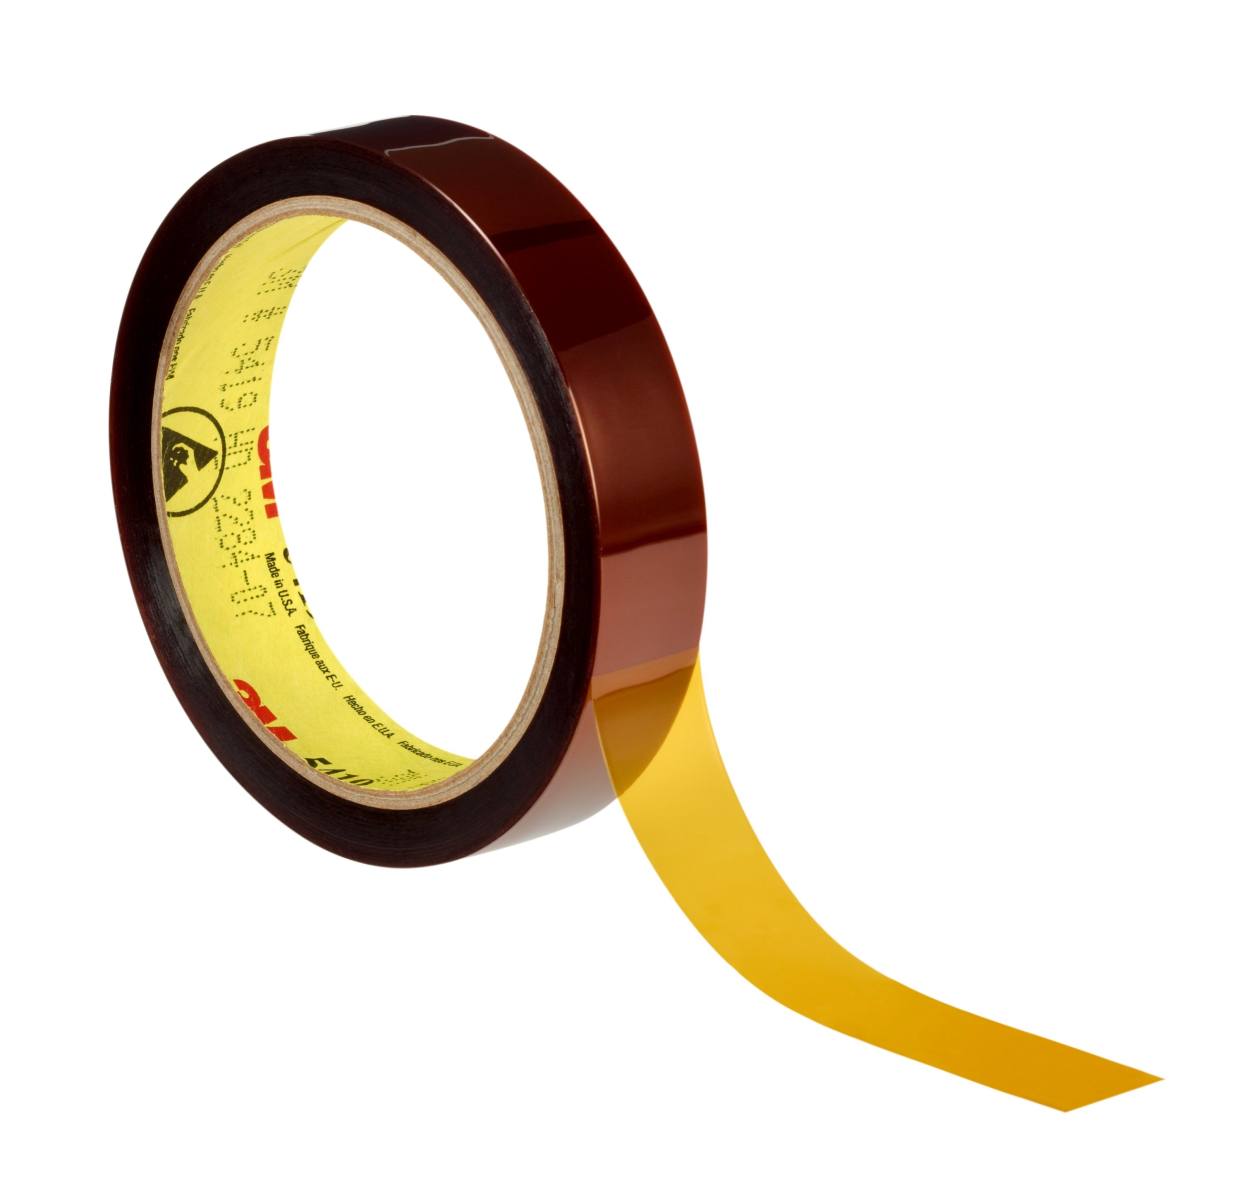 3M High-temperature polyimide adhesive tape 5419, plastic core, brown, 609.6 mm x 33 m, 68.58 Âµm